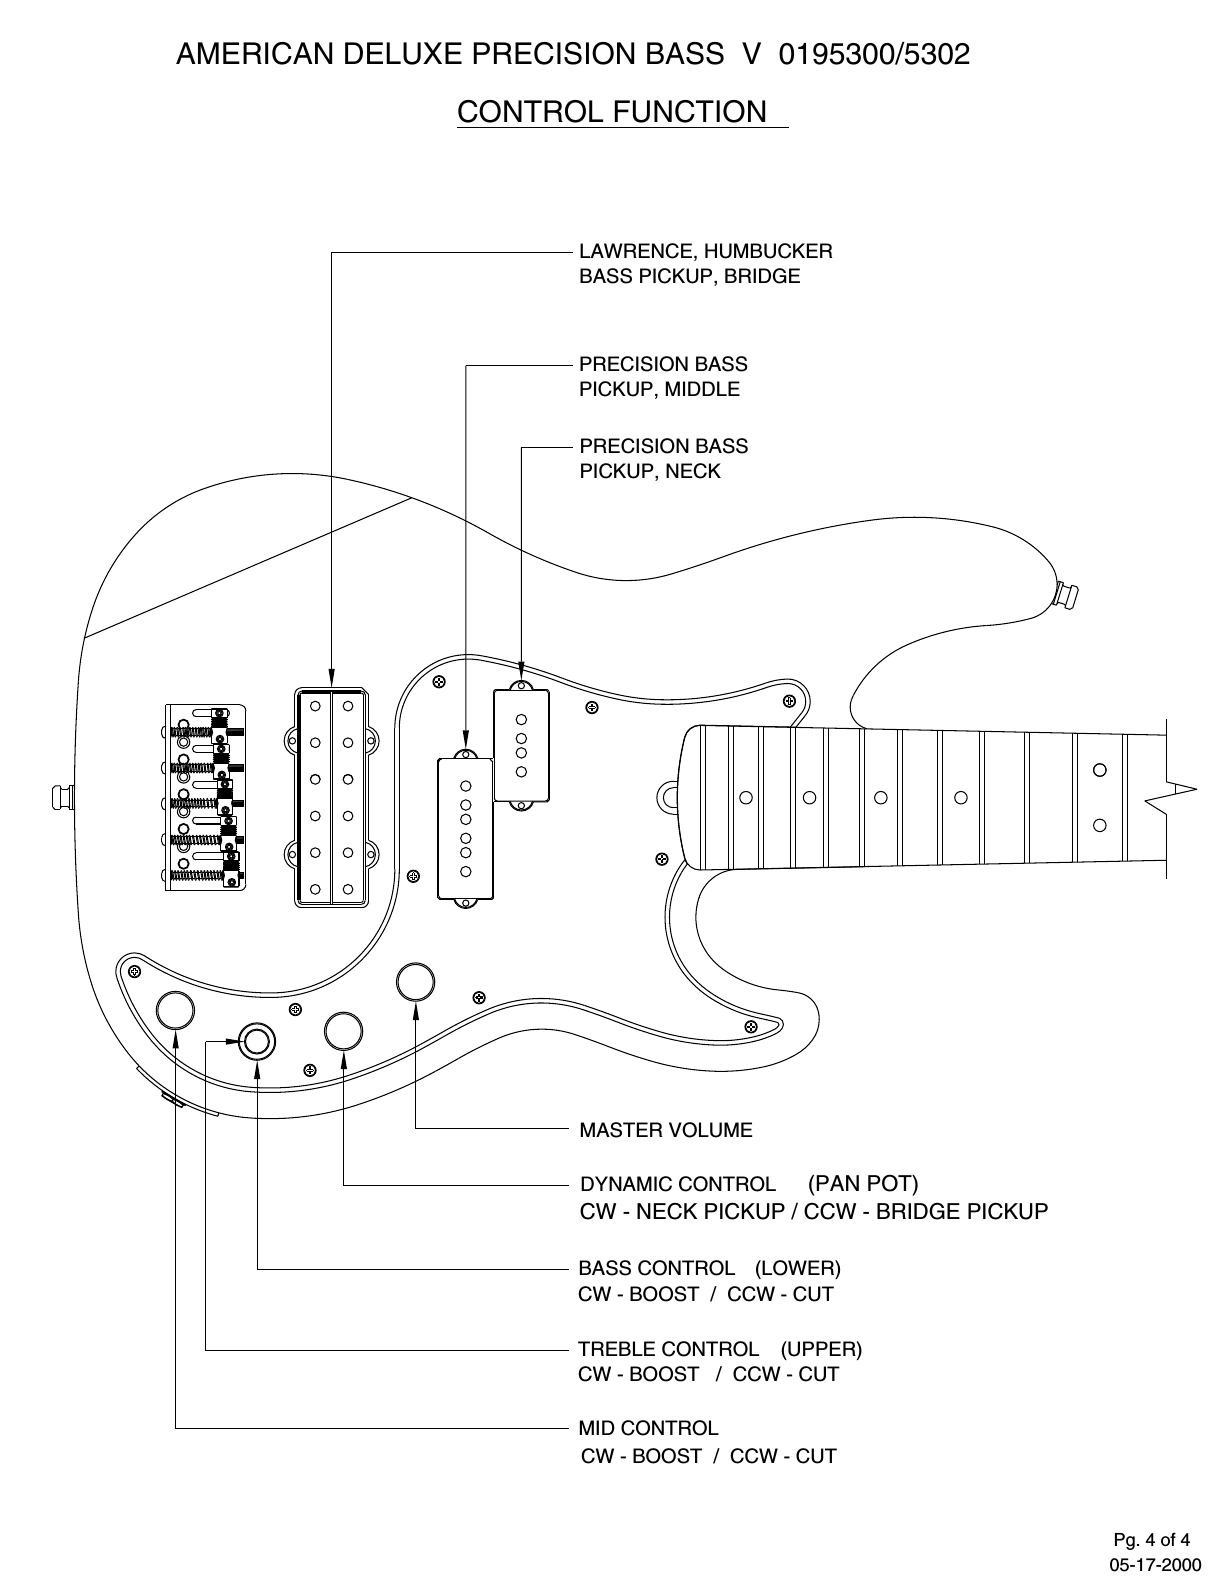 Page 4 of 4 - Fender  019-5300 02A SISD